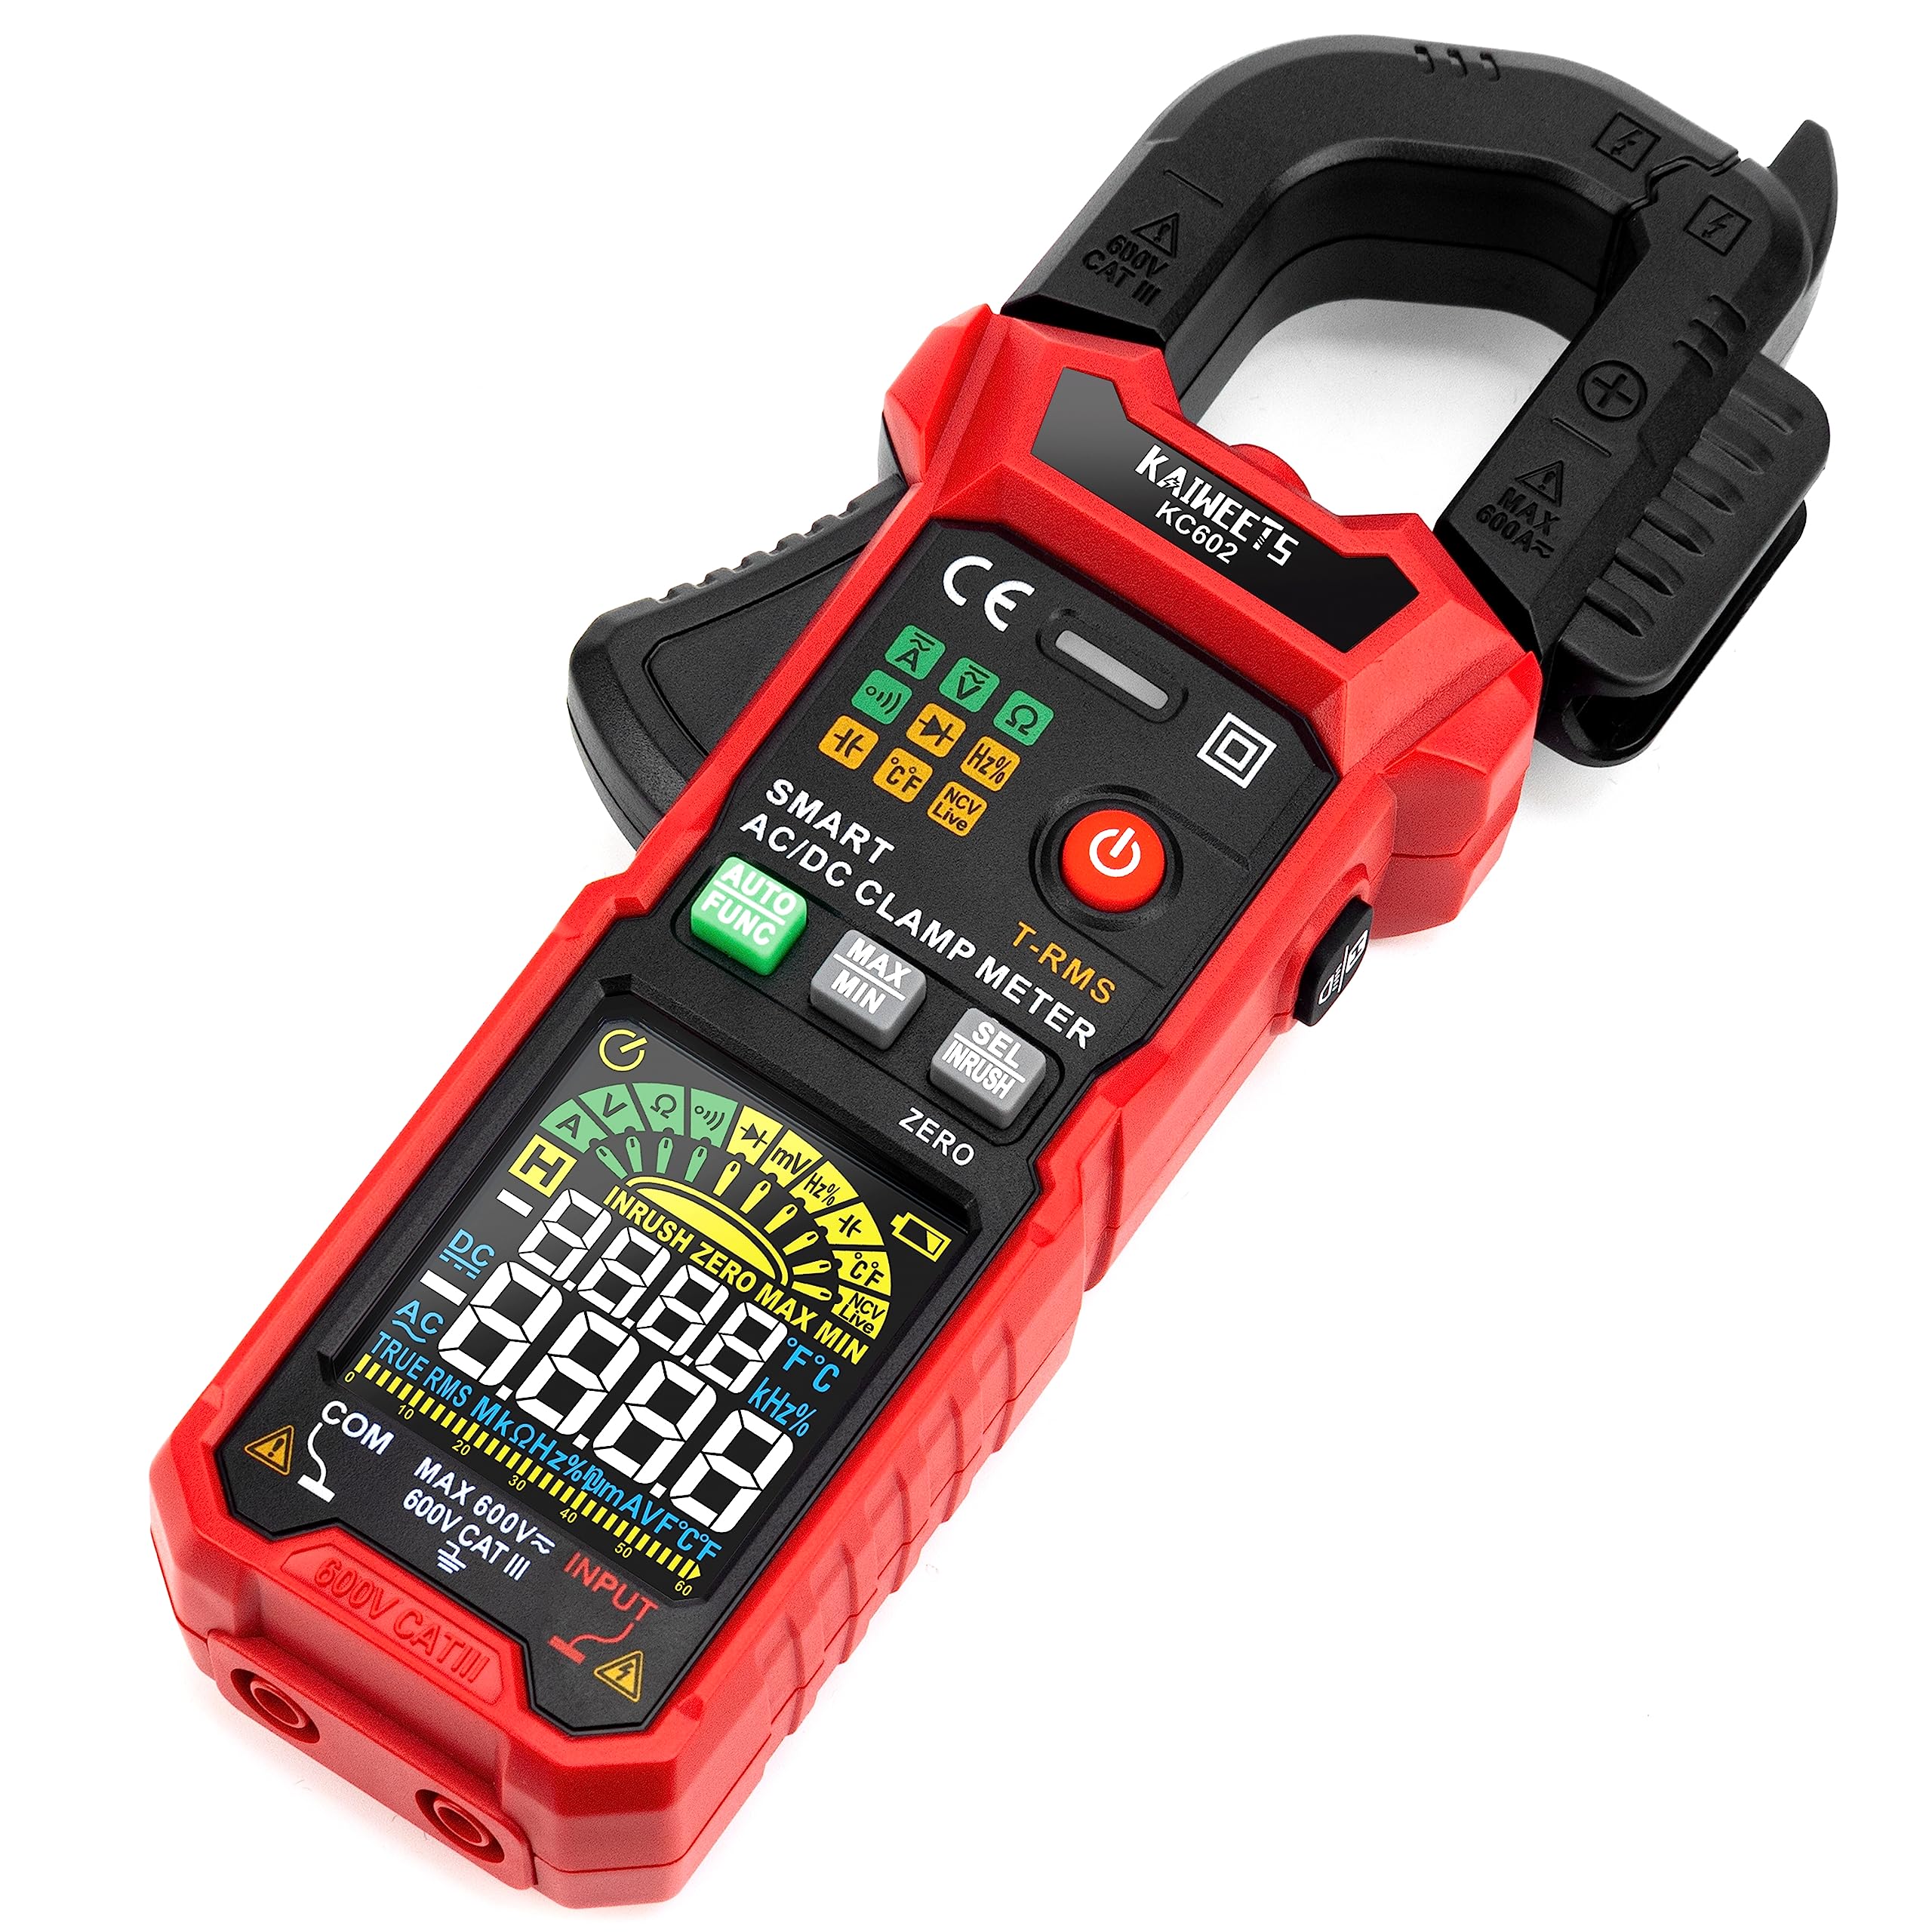 KAIWEETS KC602 Smart Digital Clamp Meter with D-Shaped Jaws, Clamp Multimeter with Inrush Current Function, Auto-ranging Amp Meter Built-in HD Color Screen - $34.79